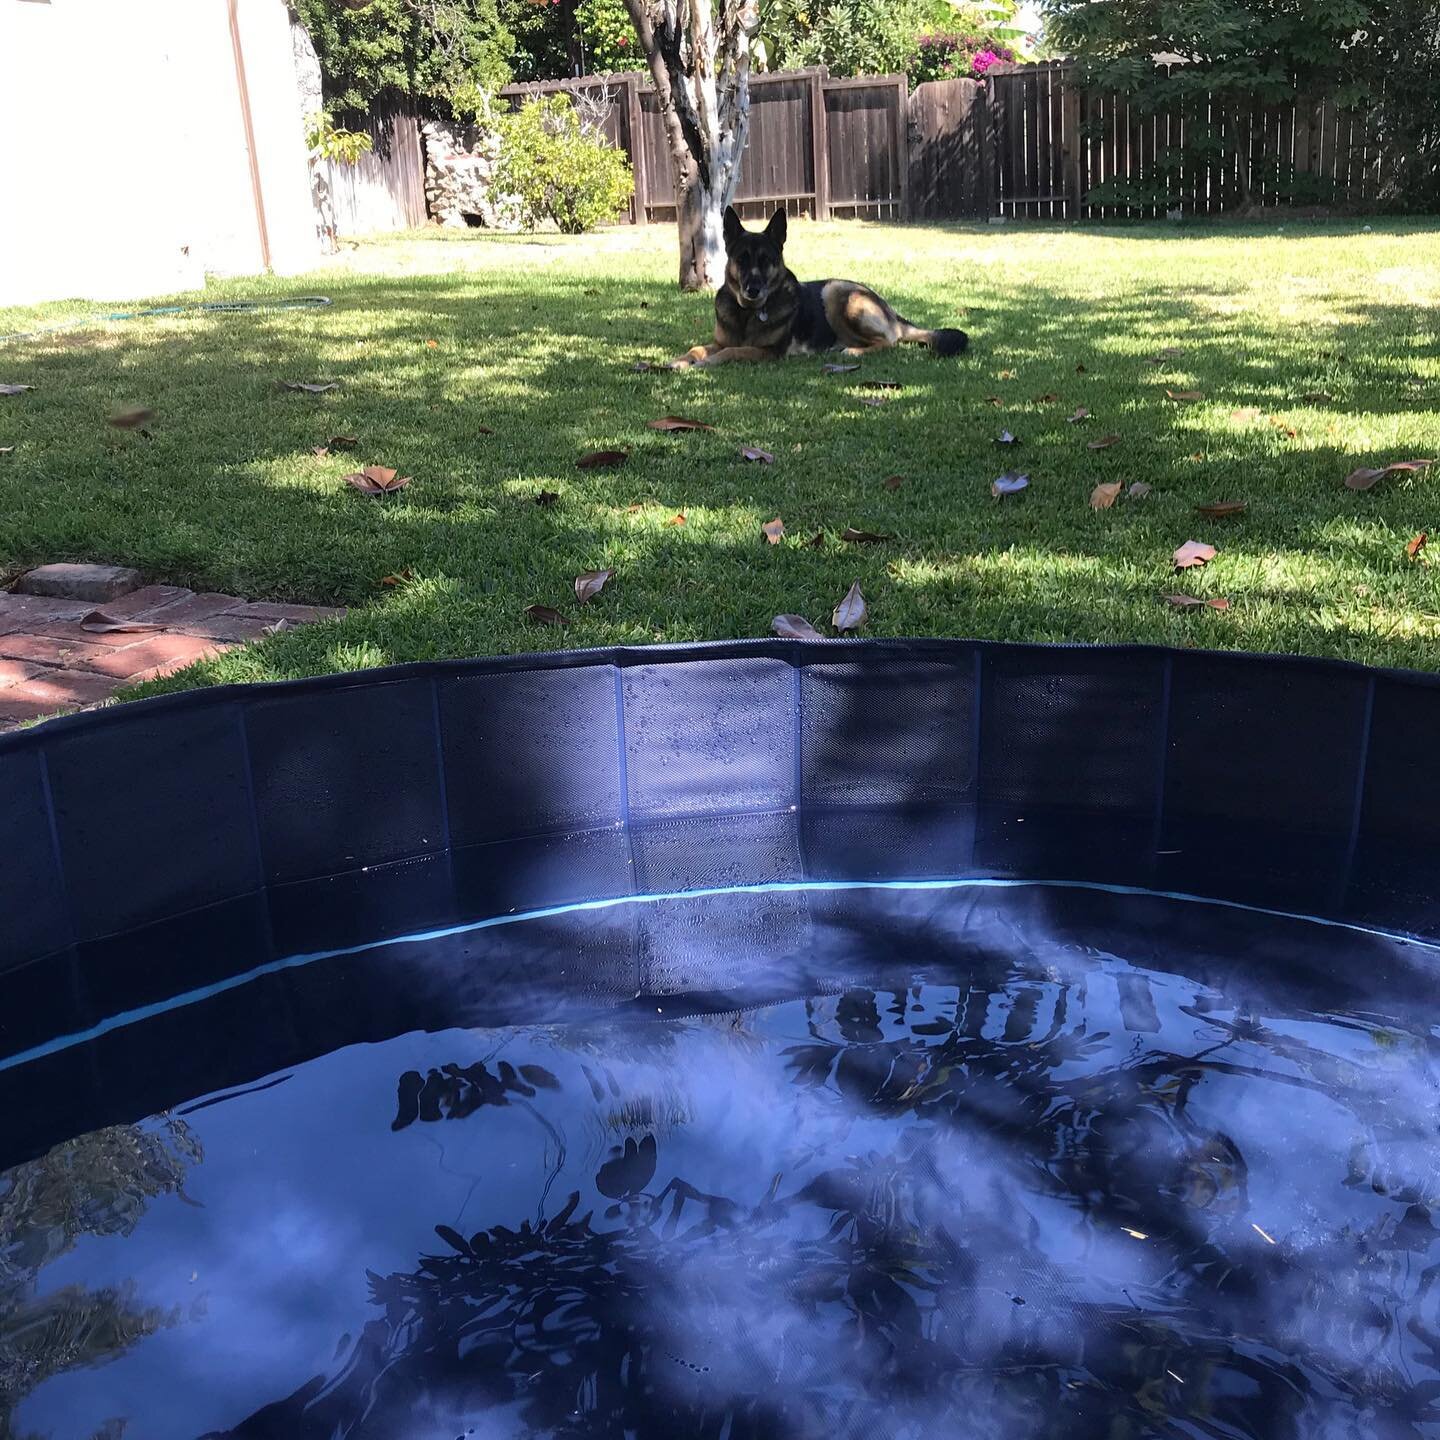 We often imagine that we know how things will go. Take this dog pool that I ordered only to realize Gypsy wanted little to do with it. ⠀
⠀
Mindfulness teaches us to be present because the present is all we have. ⠀
⠀
If we place our attention elsewher